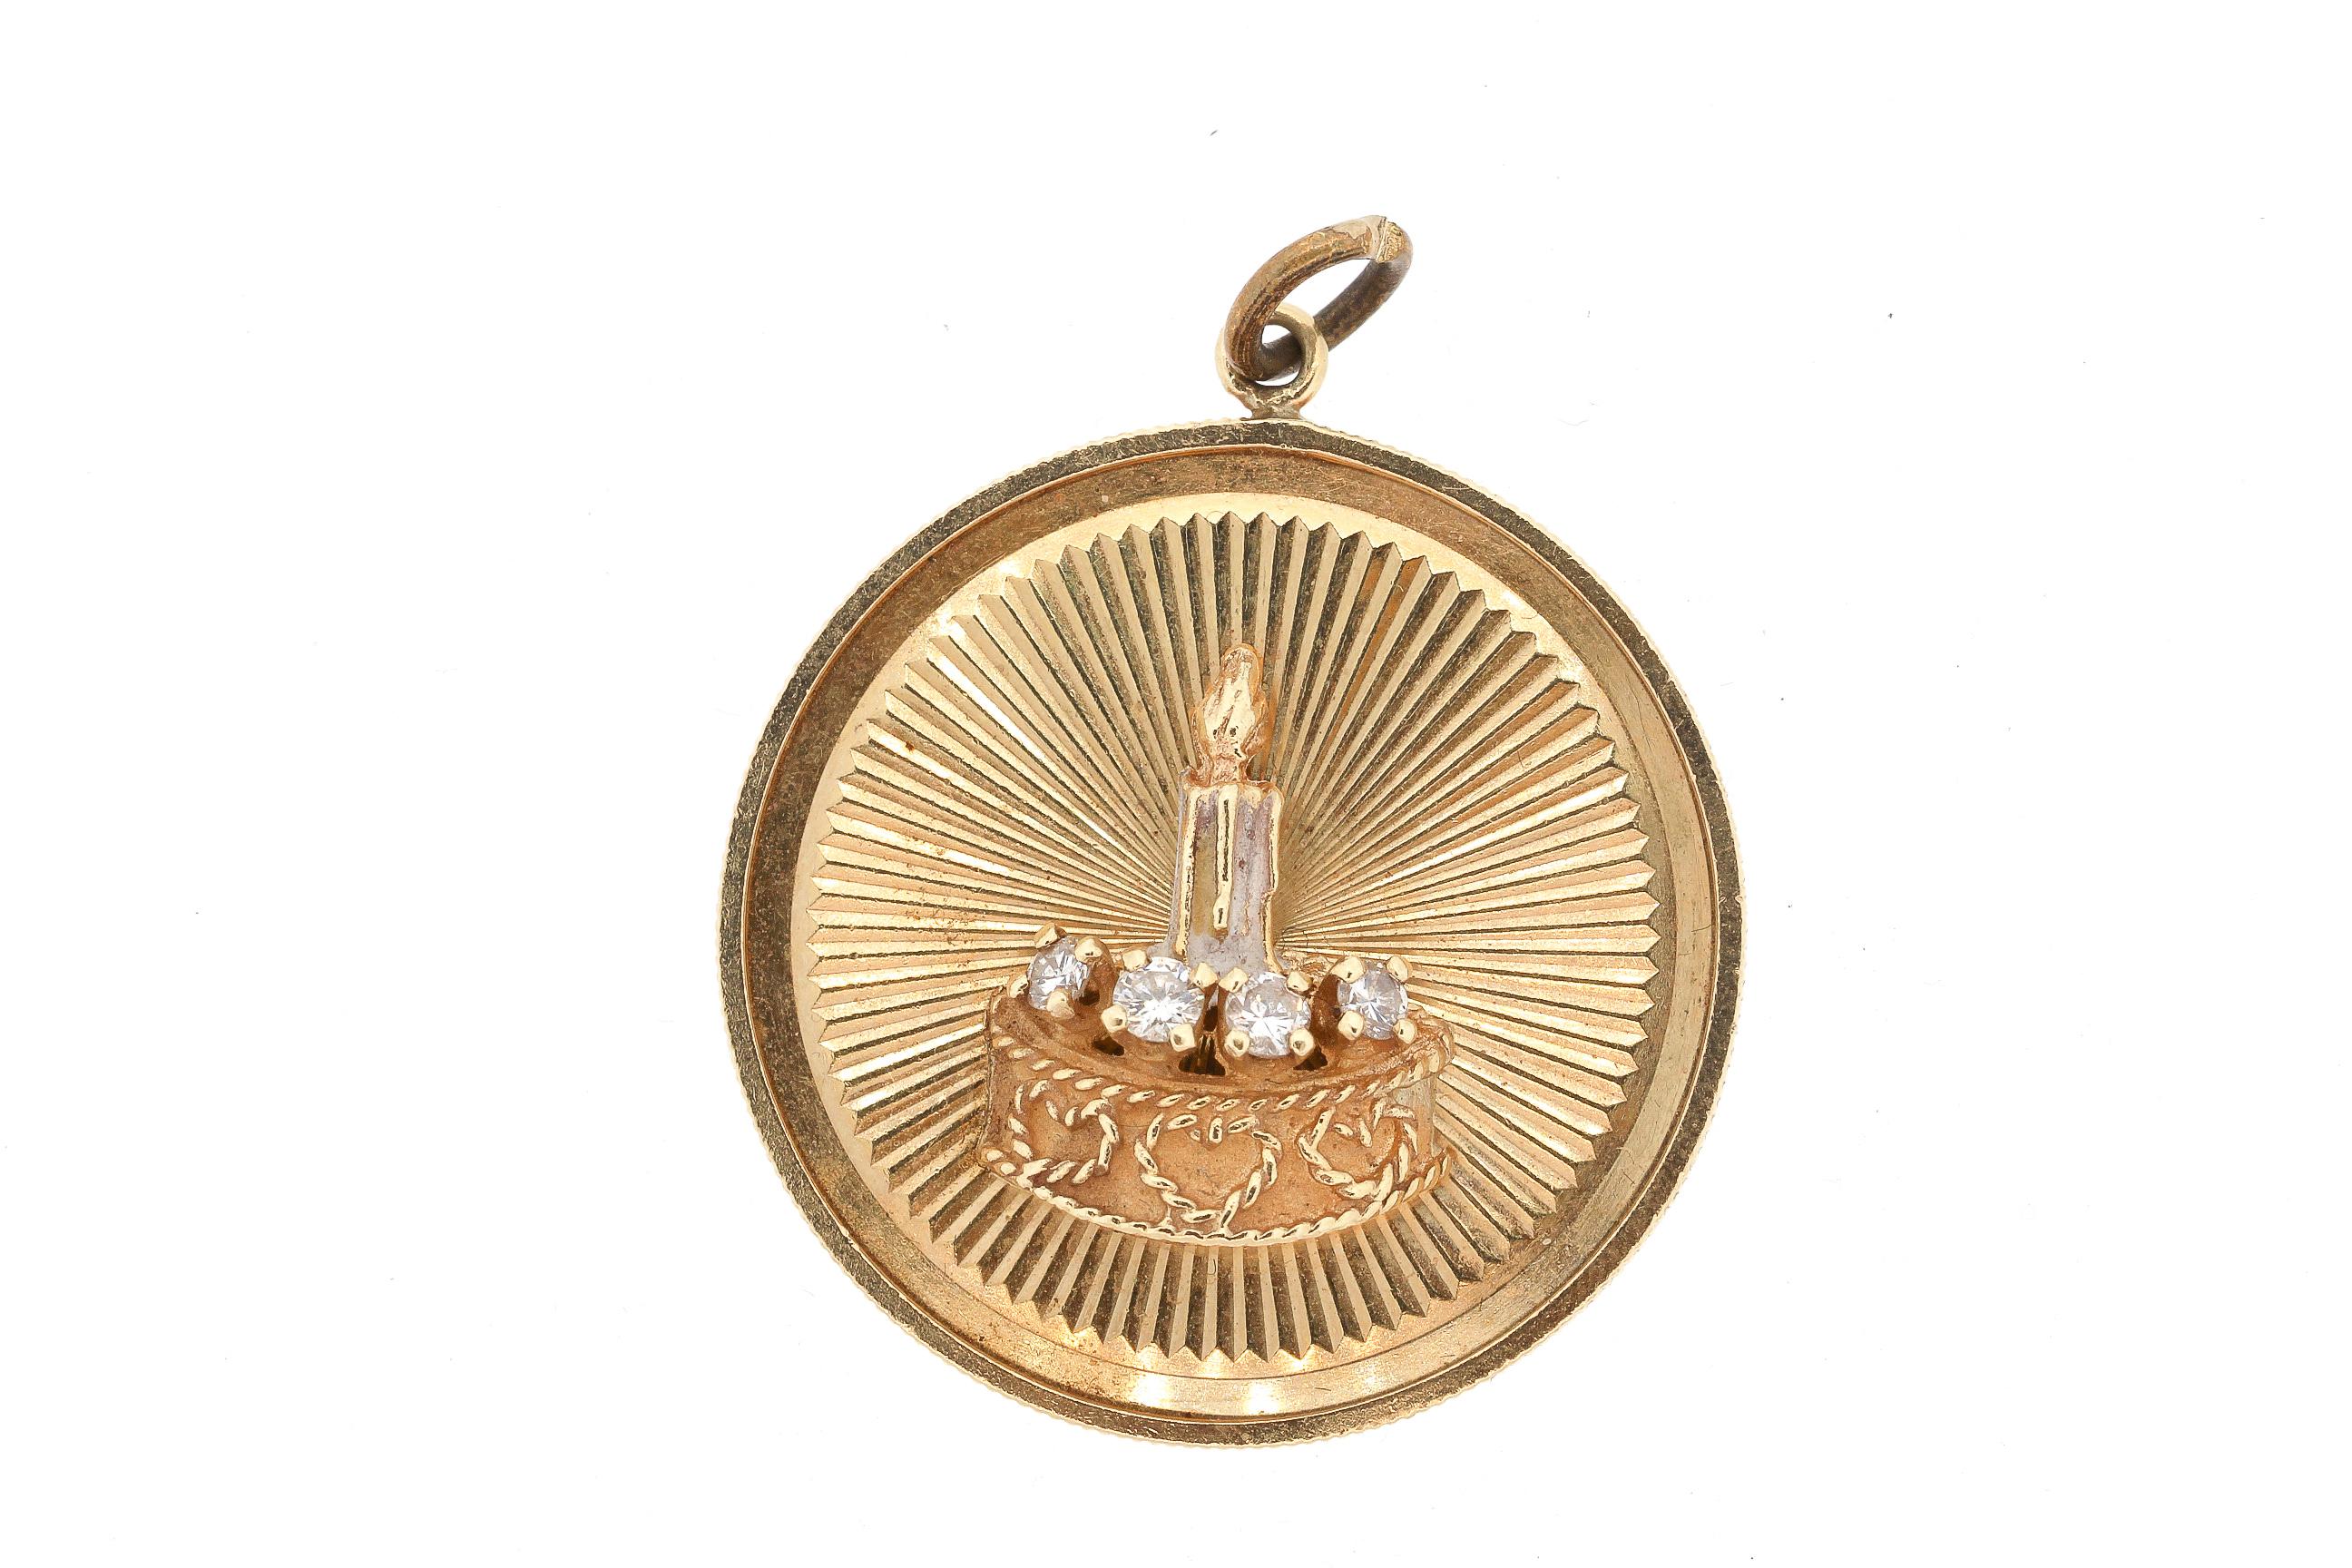 A large 14k yellow gold round disc charm with a birthday cake set with 4 diamonds, circa 1960. The charm features a dimensional birthday cake with hearts and diamonds set on a fluted gold background. The charm has a coin edge finish. The charm is